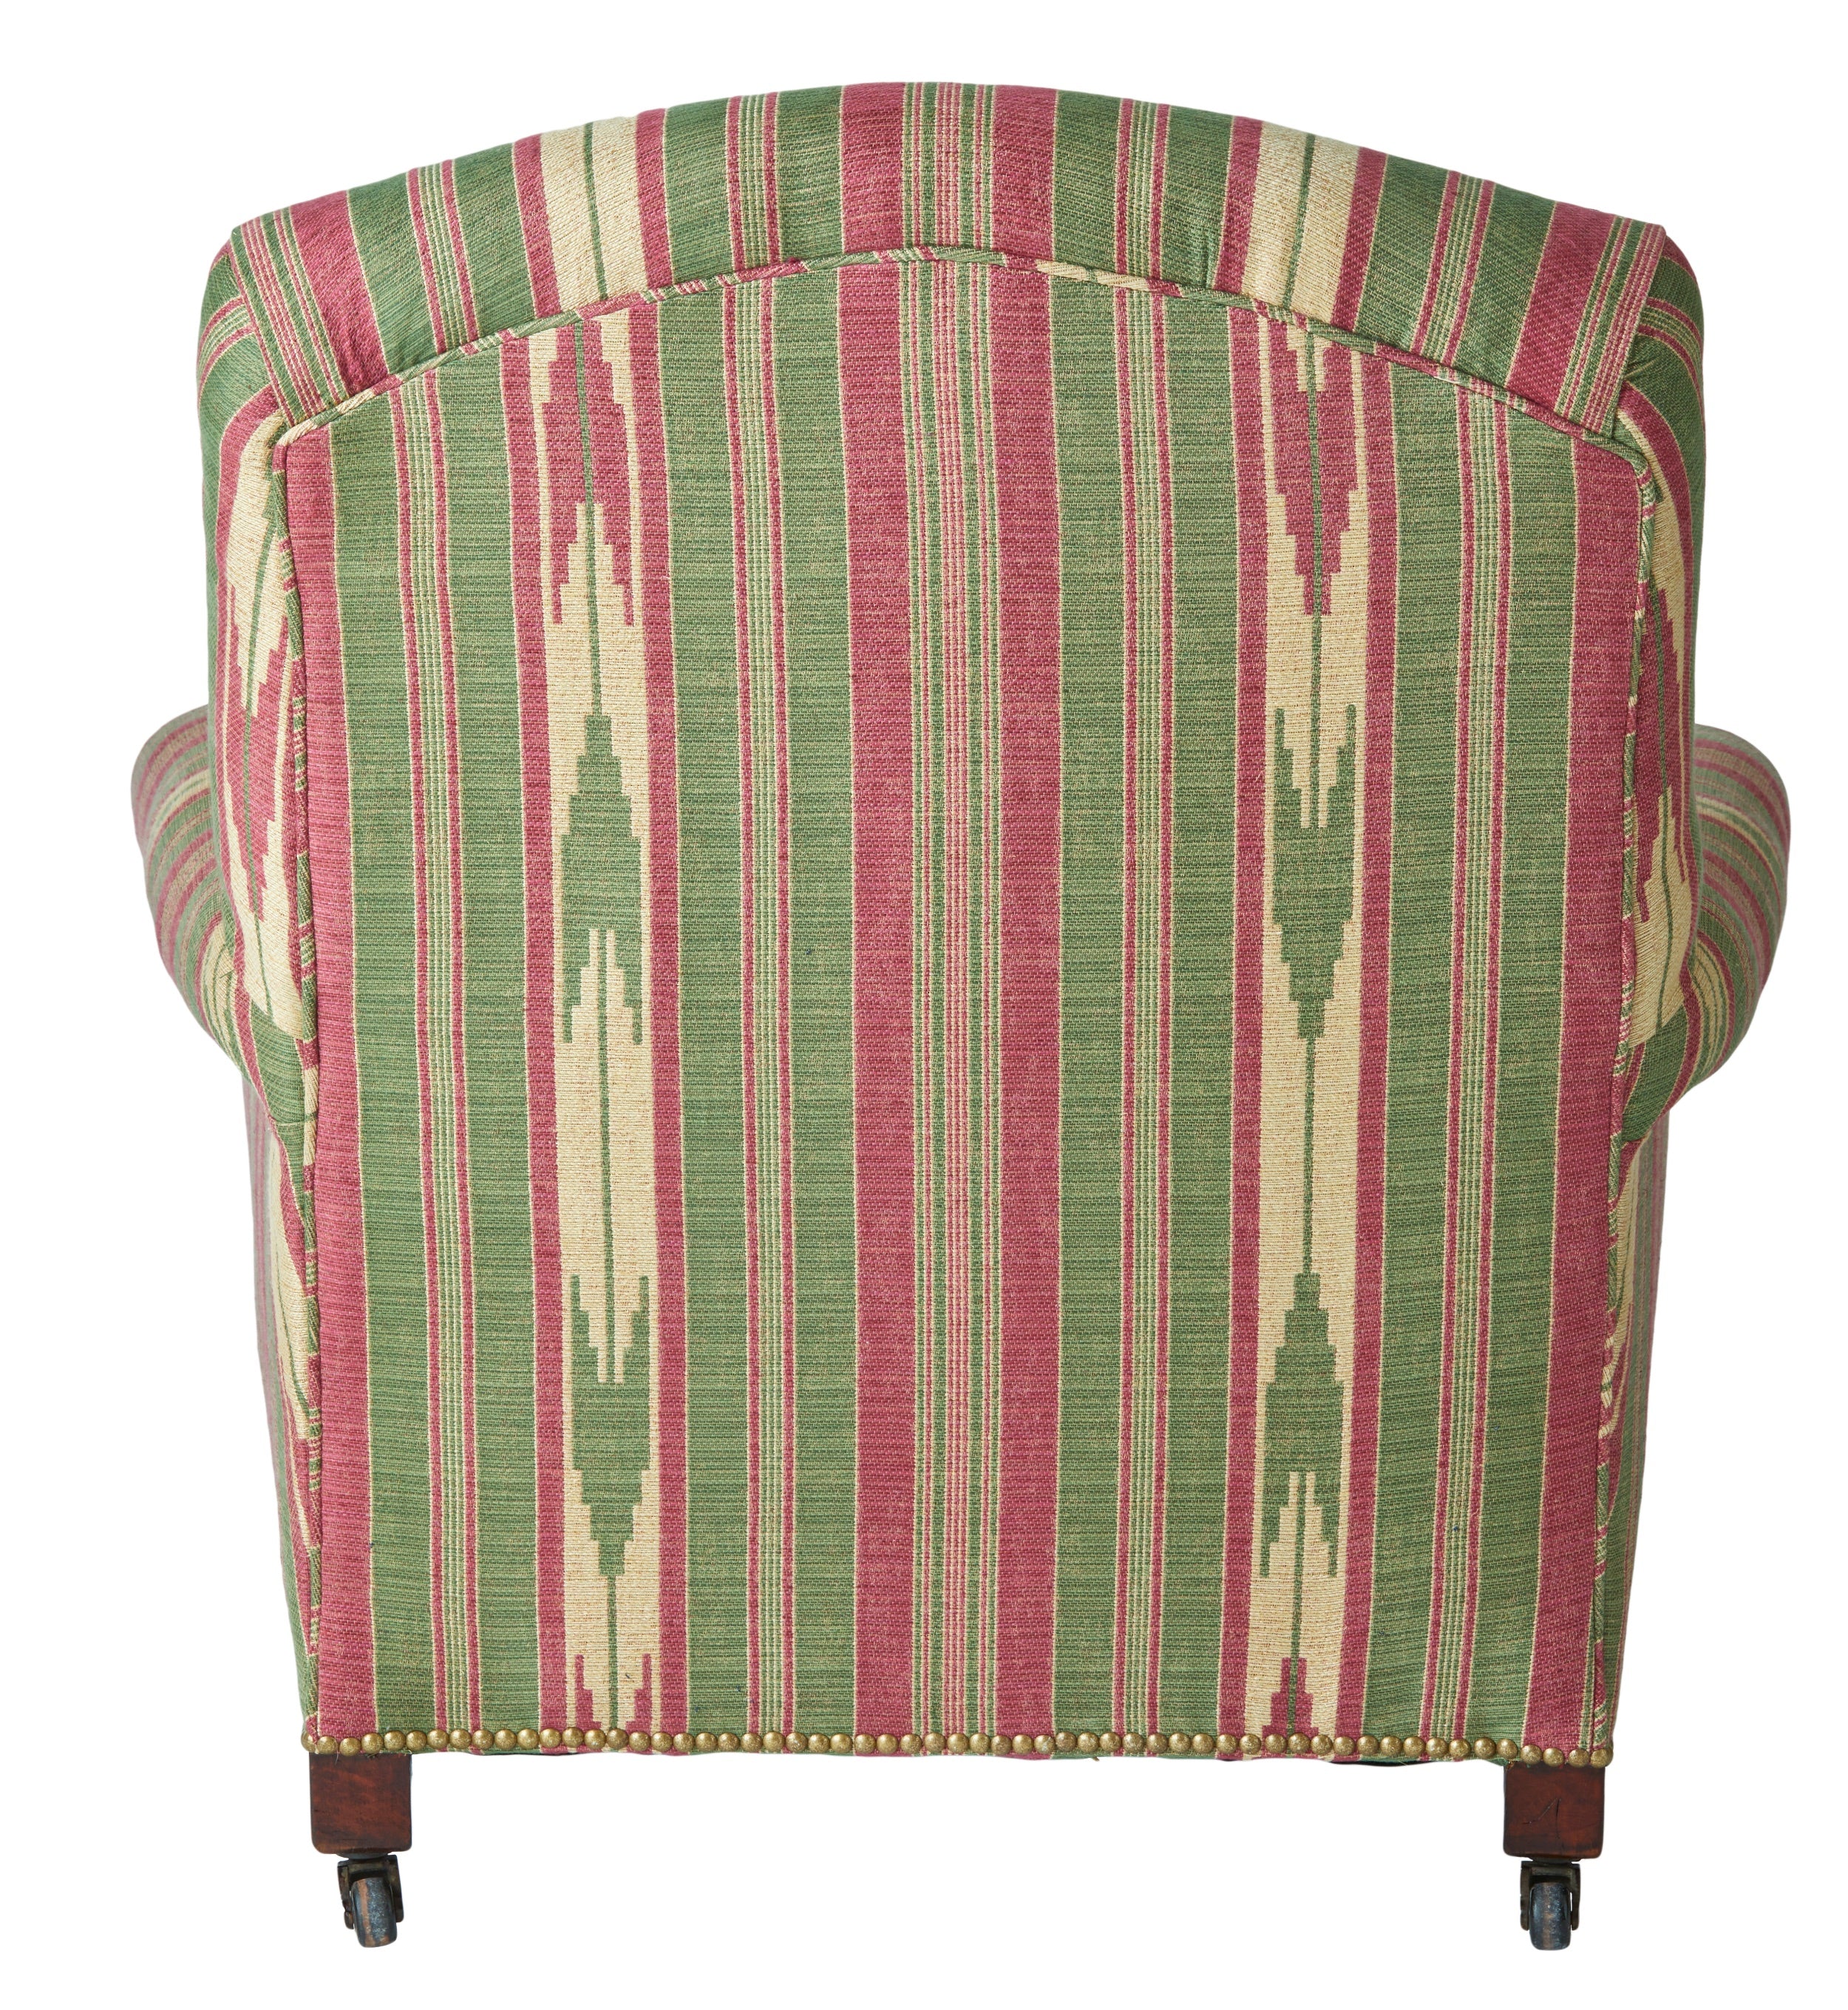 A Late 19th Century Low Armchair in Flora Soames Oulton Stripe